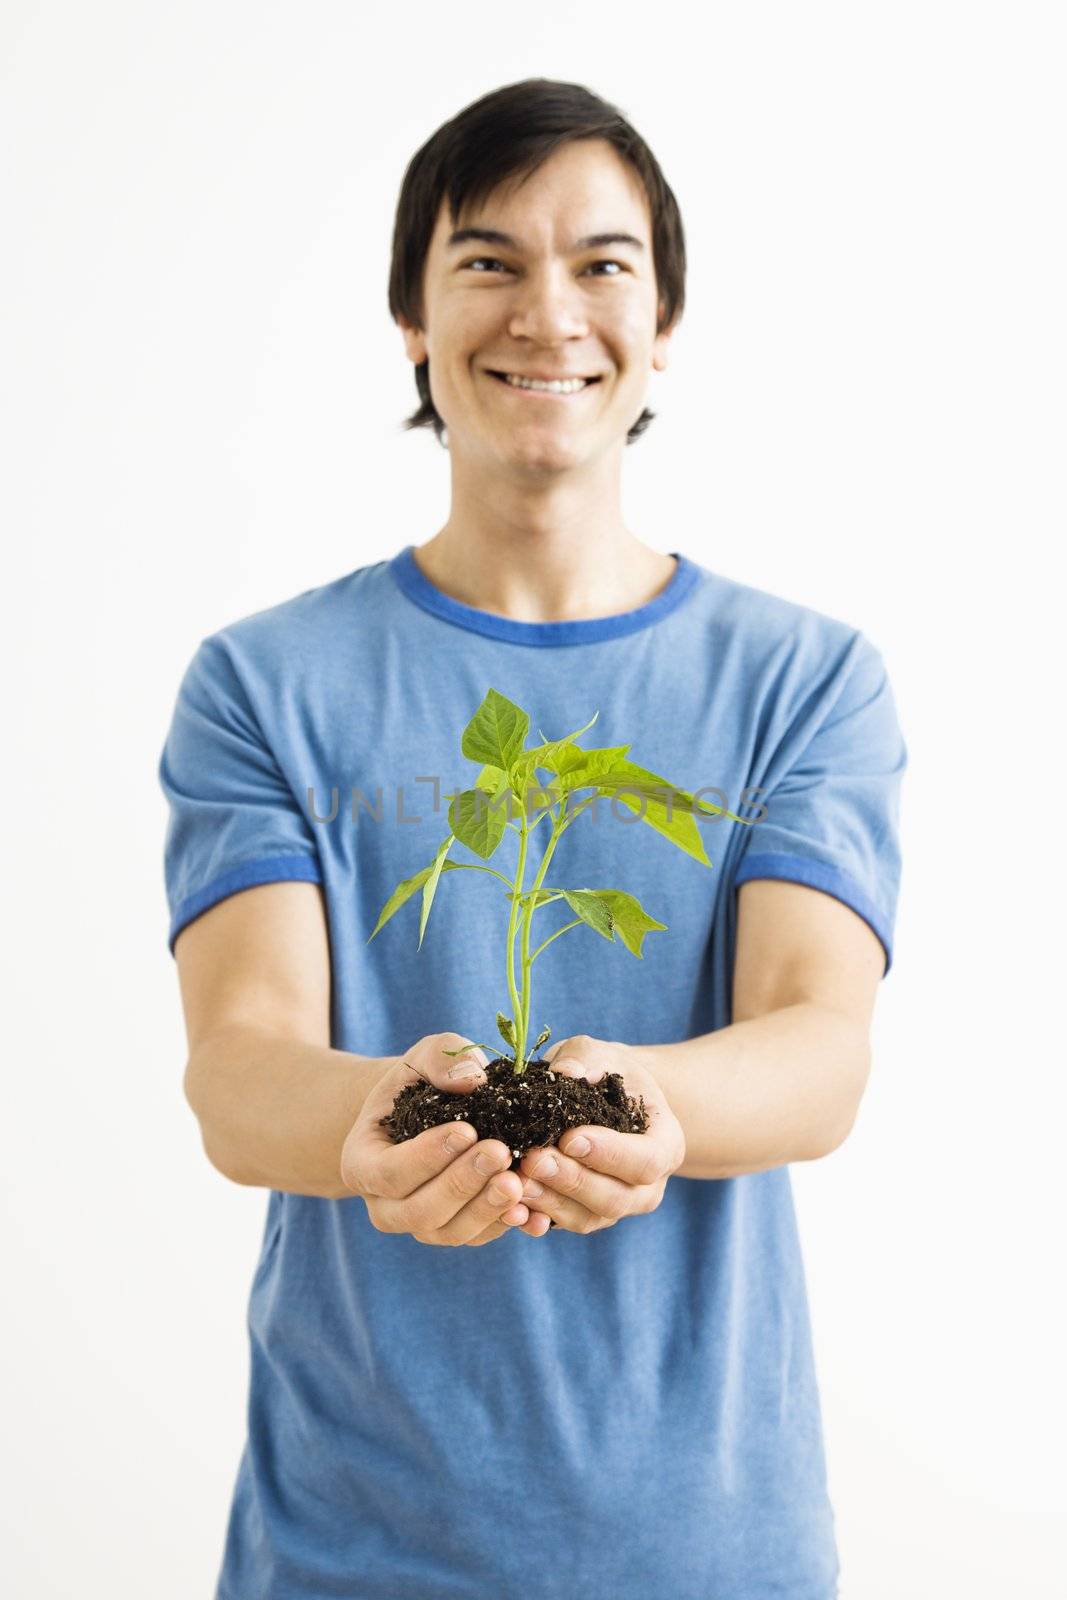 Smiling man holding plant. by iofoto